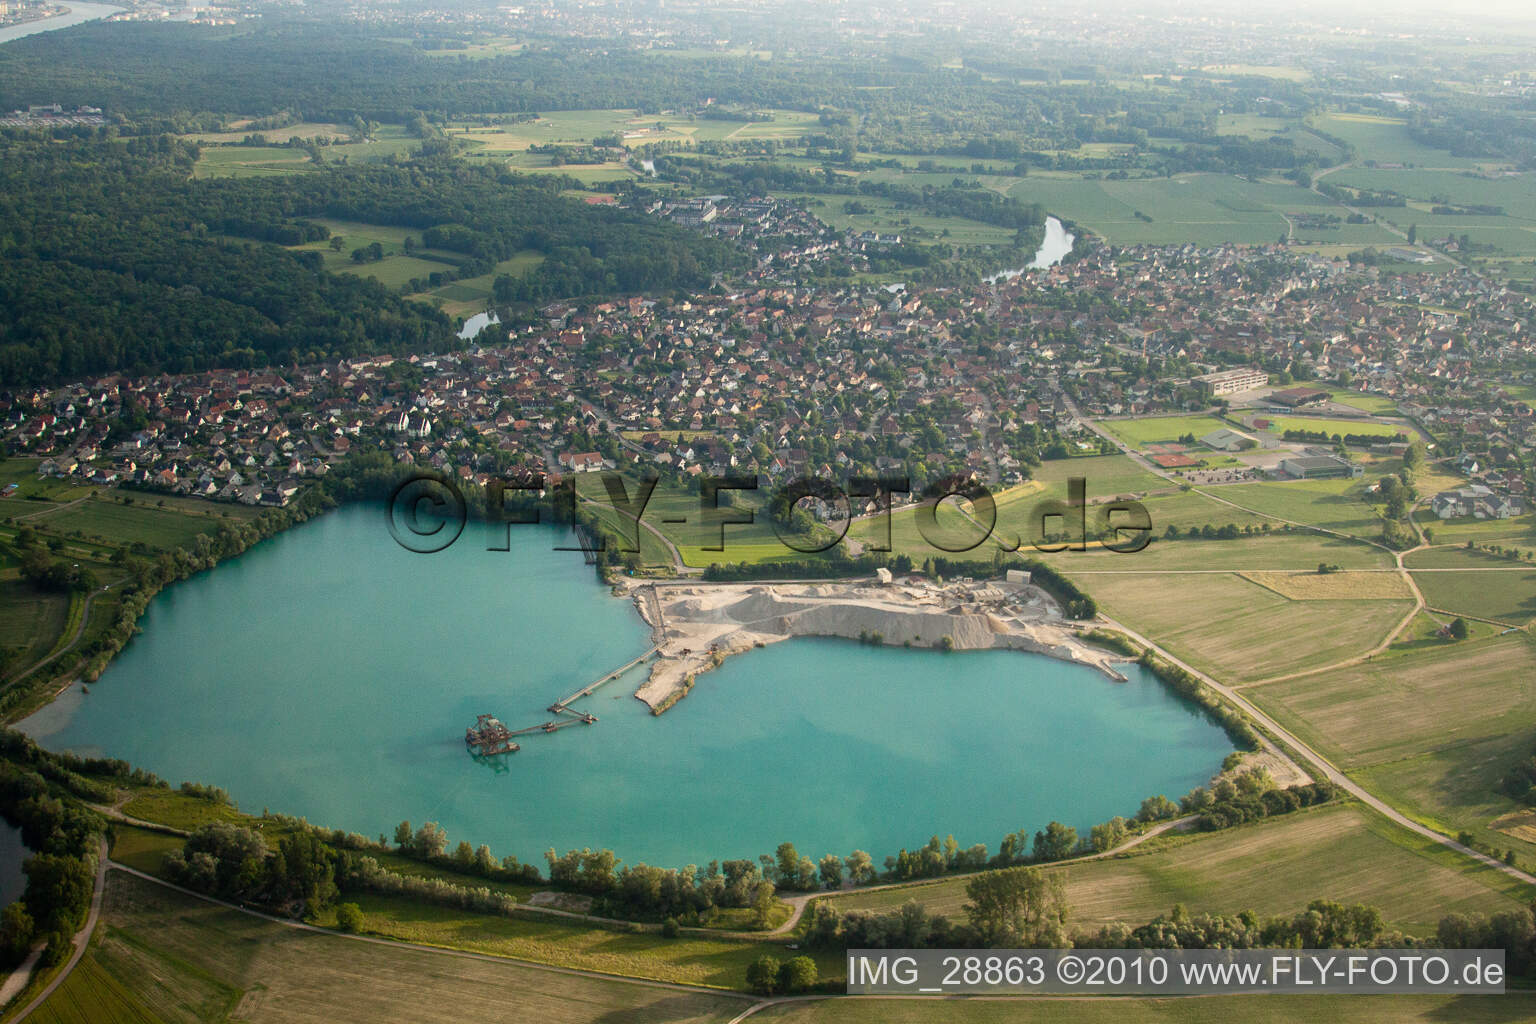 Site and tailings area of the gravel mining GraviA?re in La Wantzenau in Grand Est, France